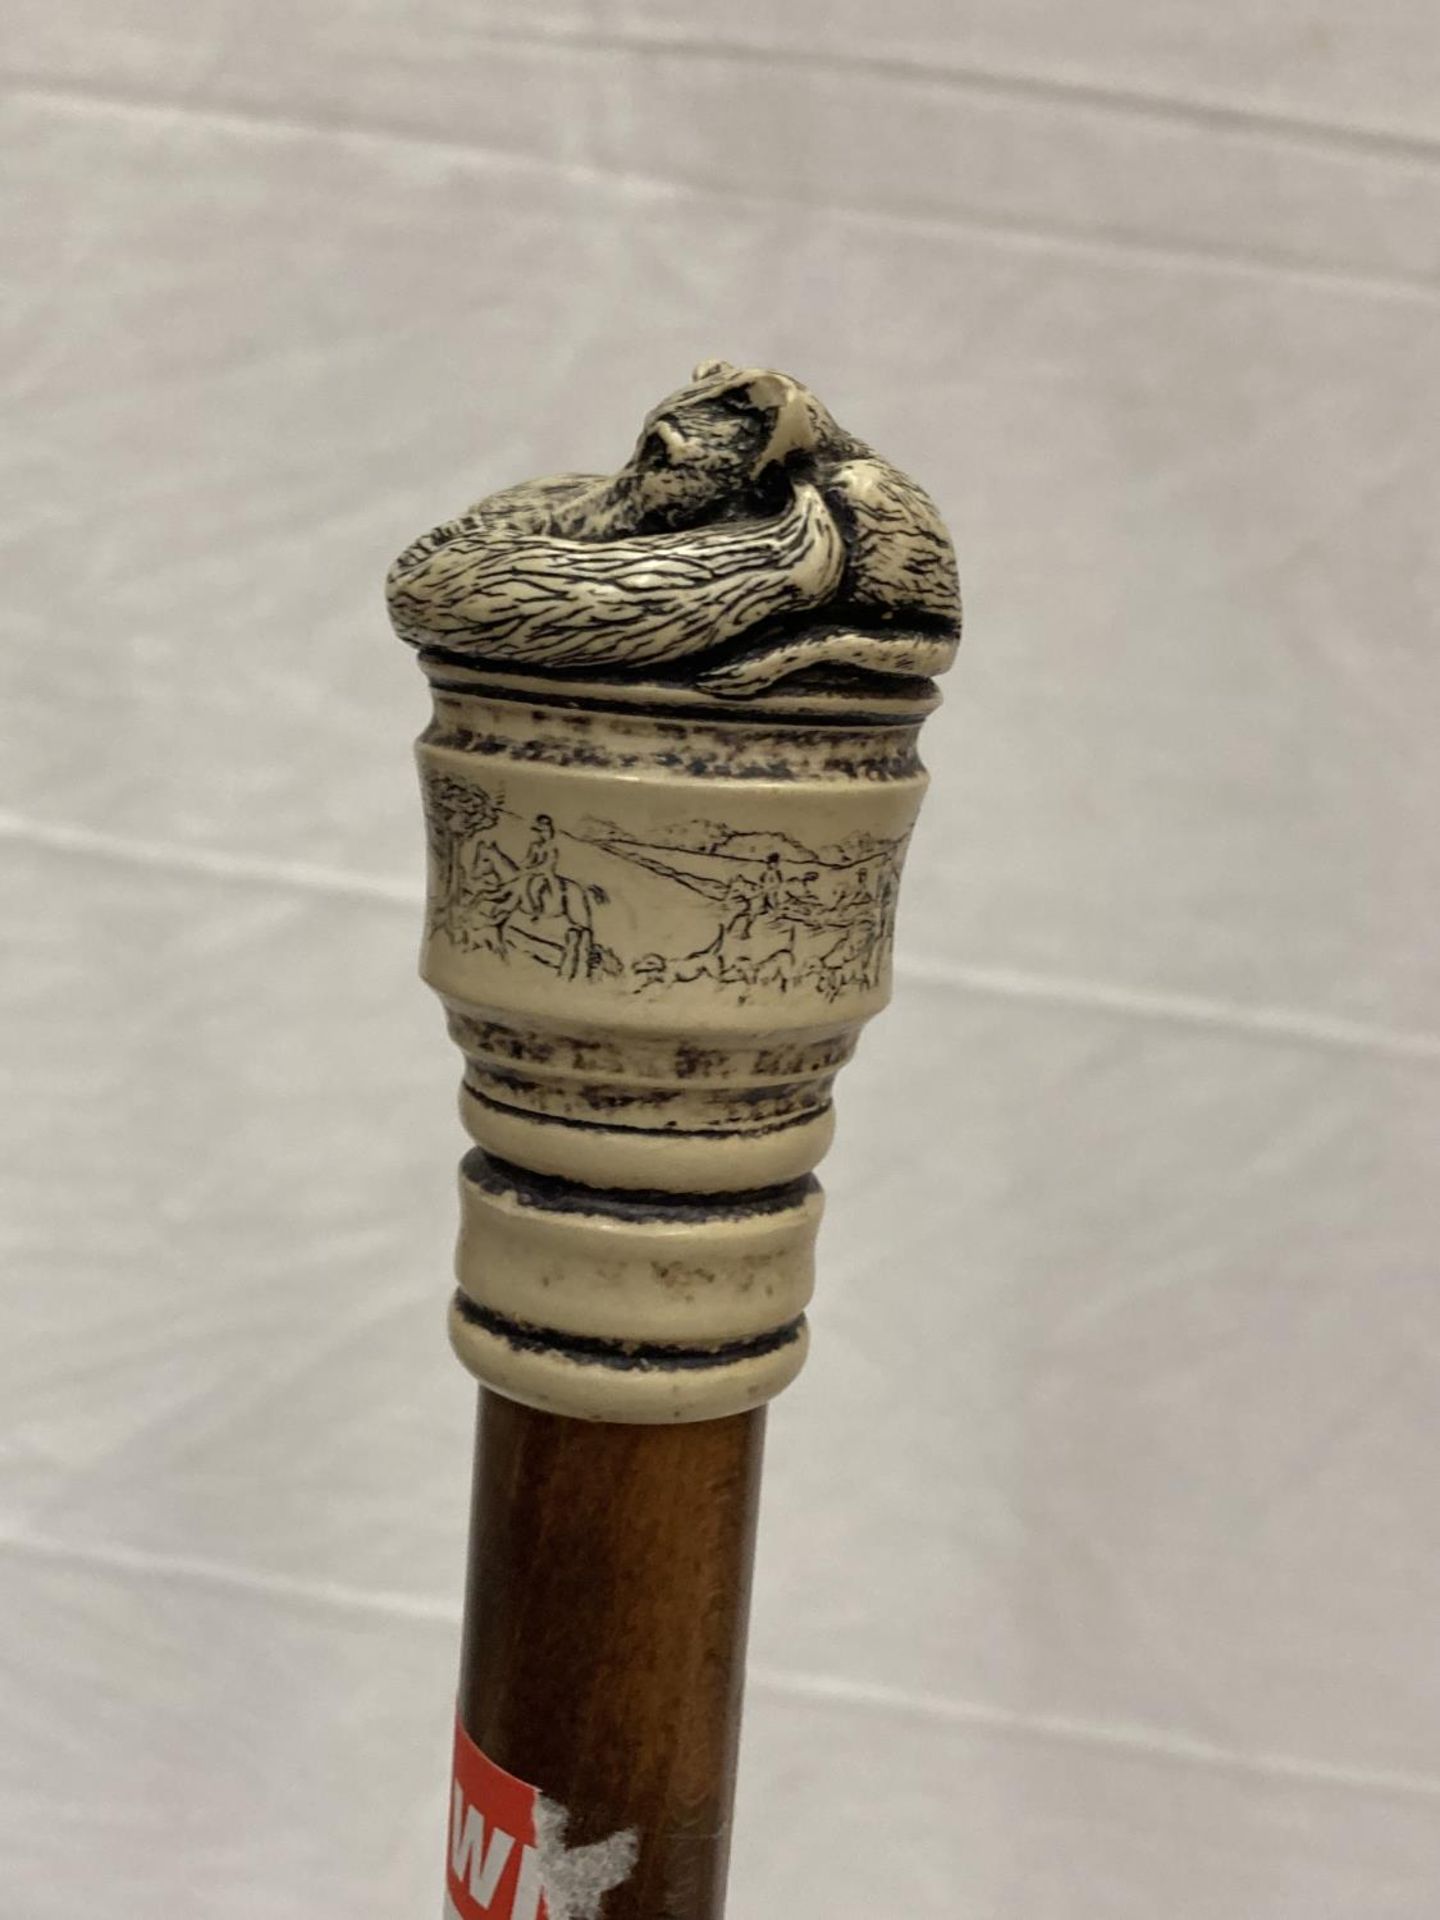 A WALKING CANE WITH A FOX FINIAL AND ENGRAVED HUNTING SCENE - Image 6 of 6